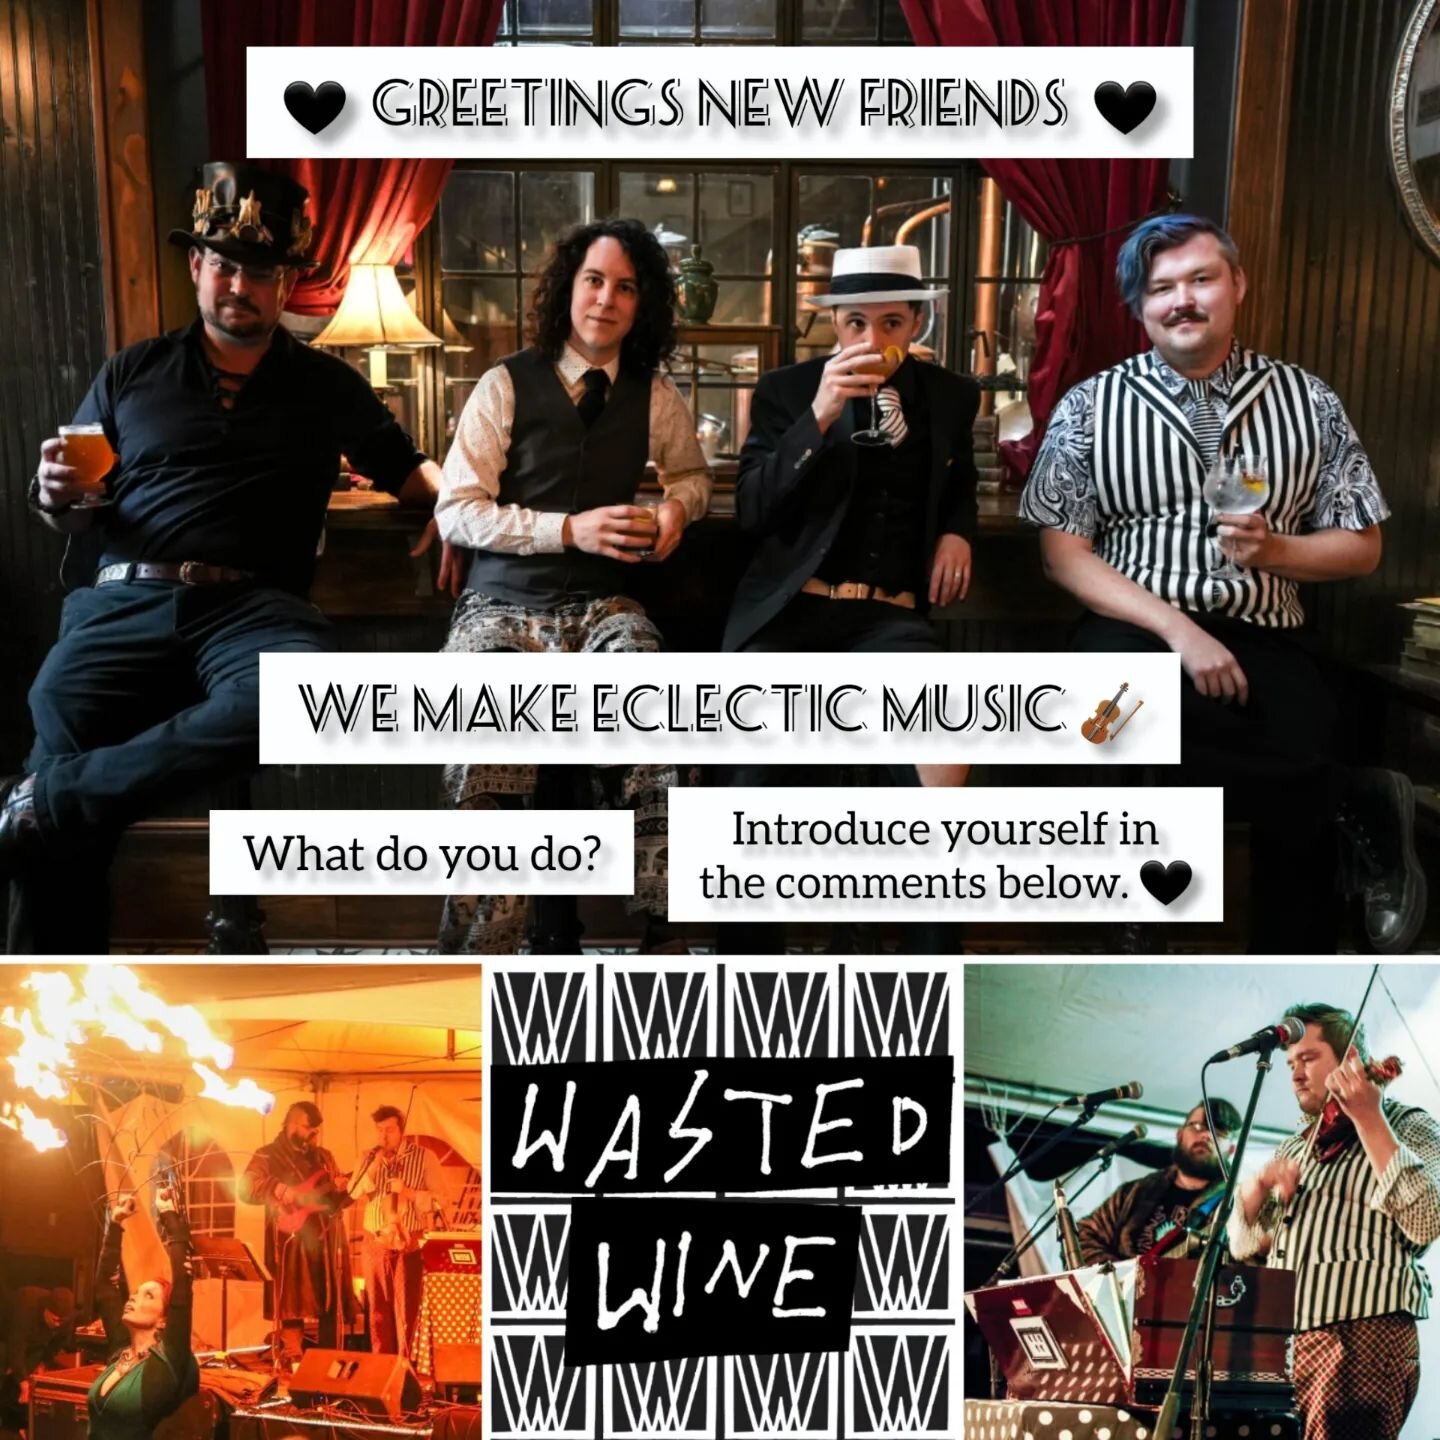 Greetings everyone! We're Wasted Wine, an eclectic alternative/indie band. Our music has gypsy cabaret vibes and we play violin, bouzouki, accordions, handpan and more. 🎻🎶 Who are you and what do you do? Please introduce yourself in the comments be